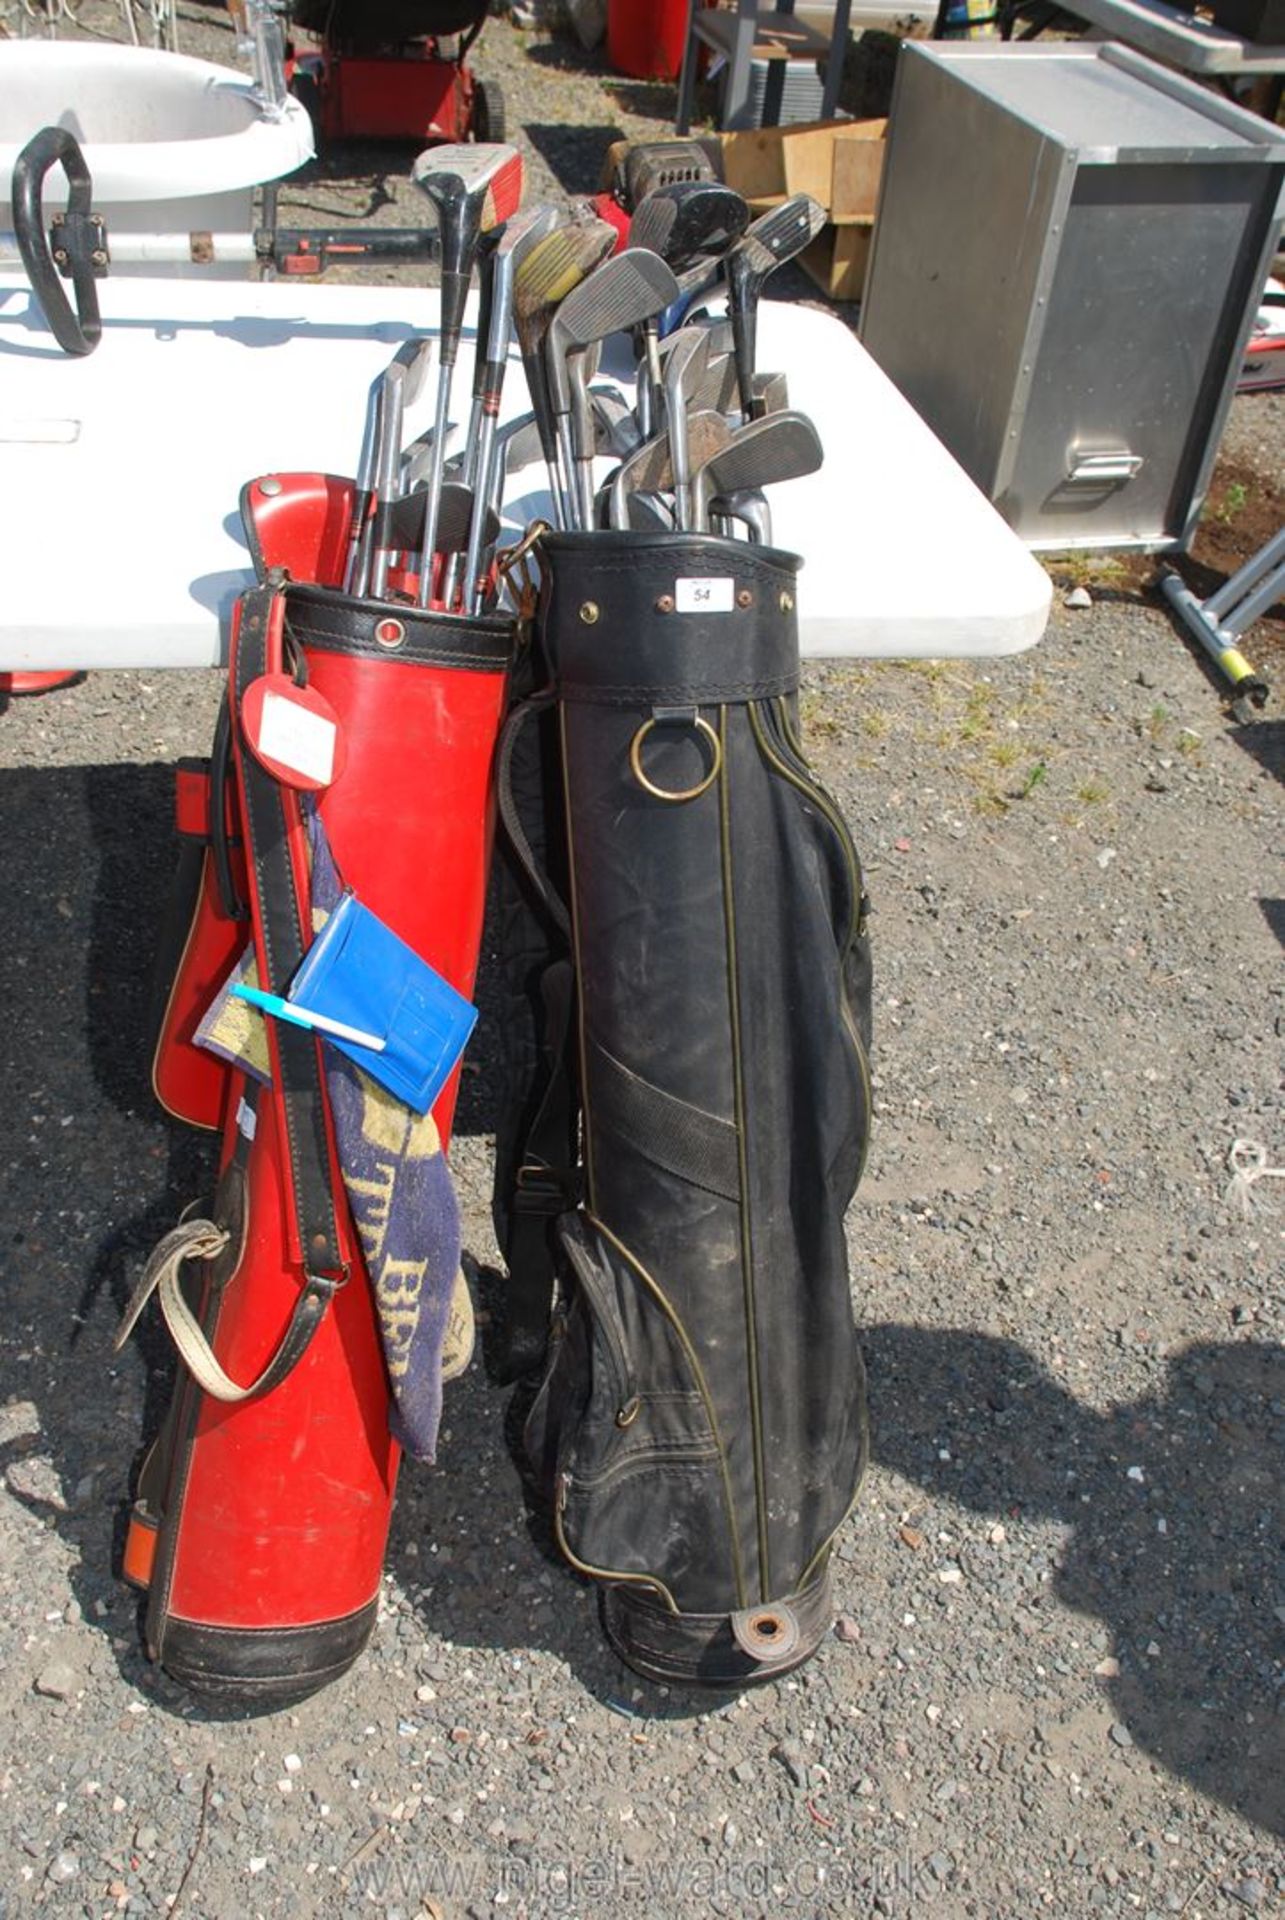 Two bags of golf clubs, Ben Sayers , John Letters.